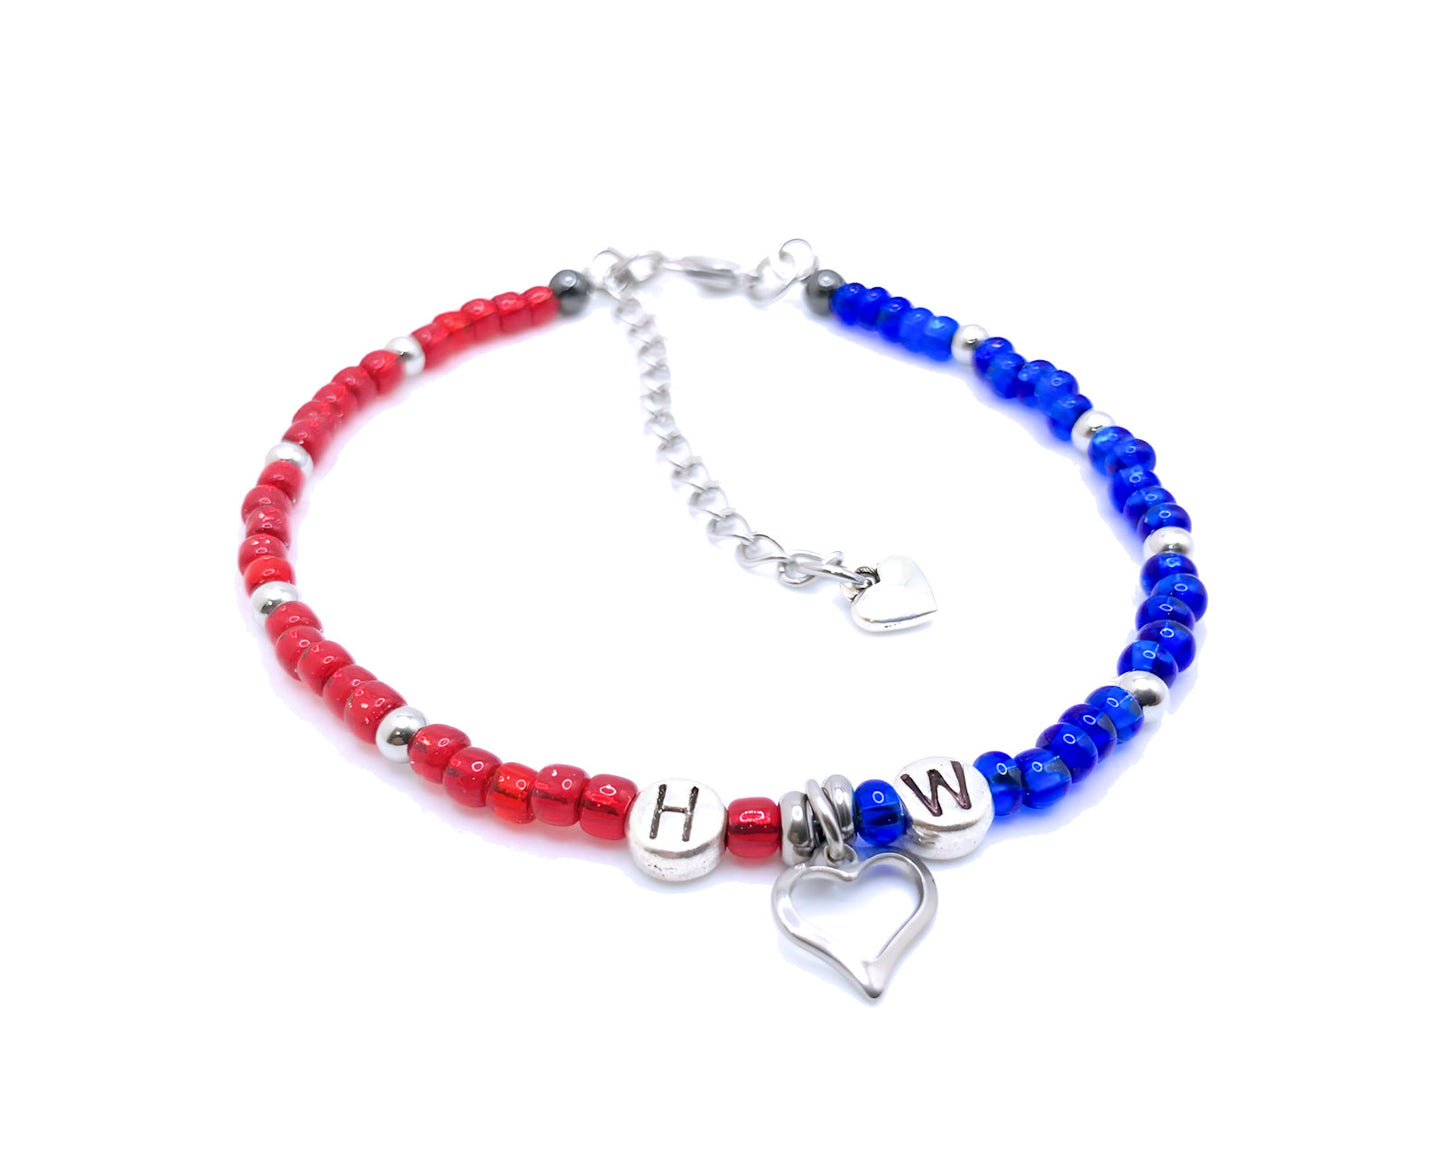 HW Hotwife Anklet / Bracelet with Heart Charm